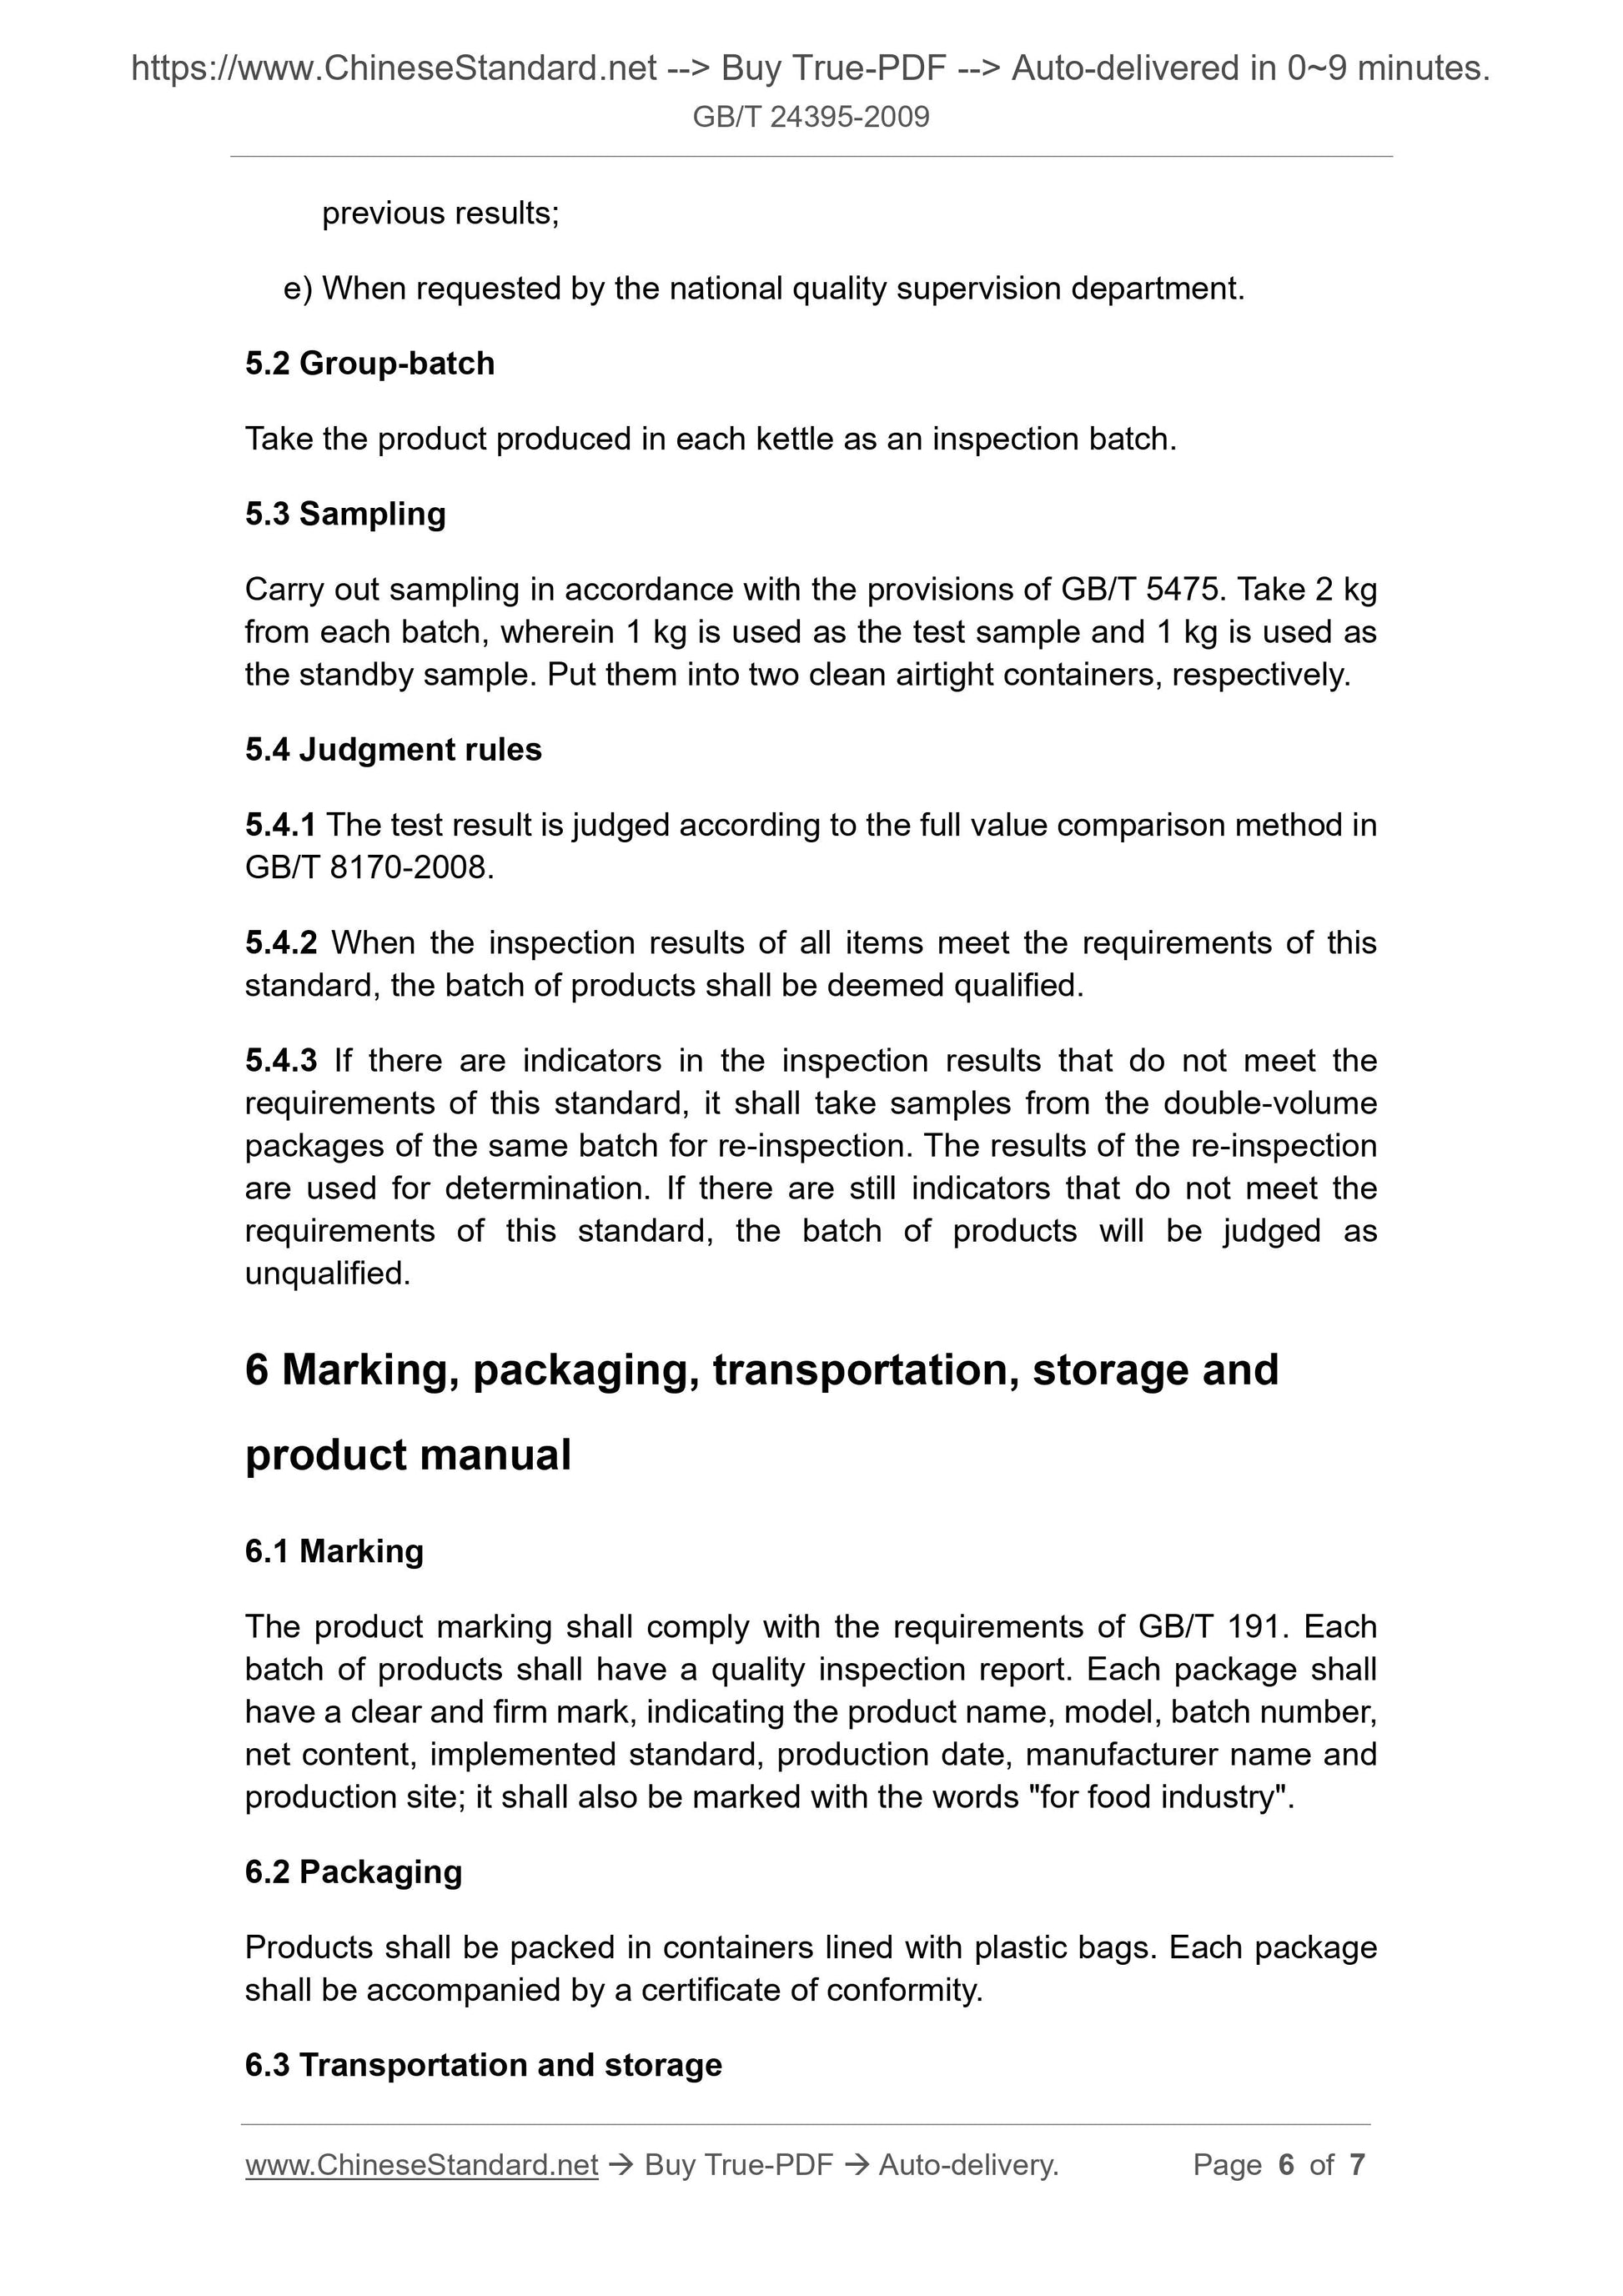 GB/T 24395-2009 Page 4